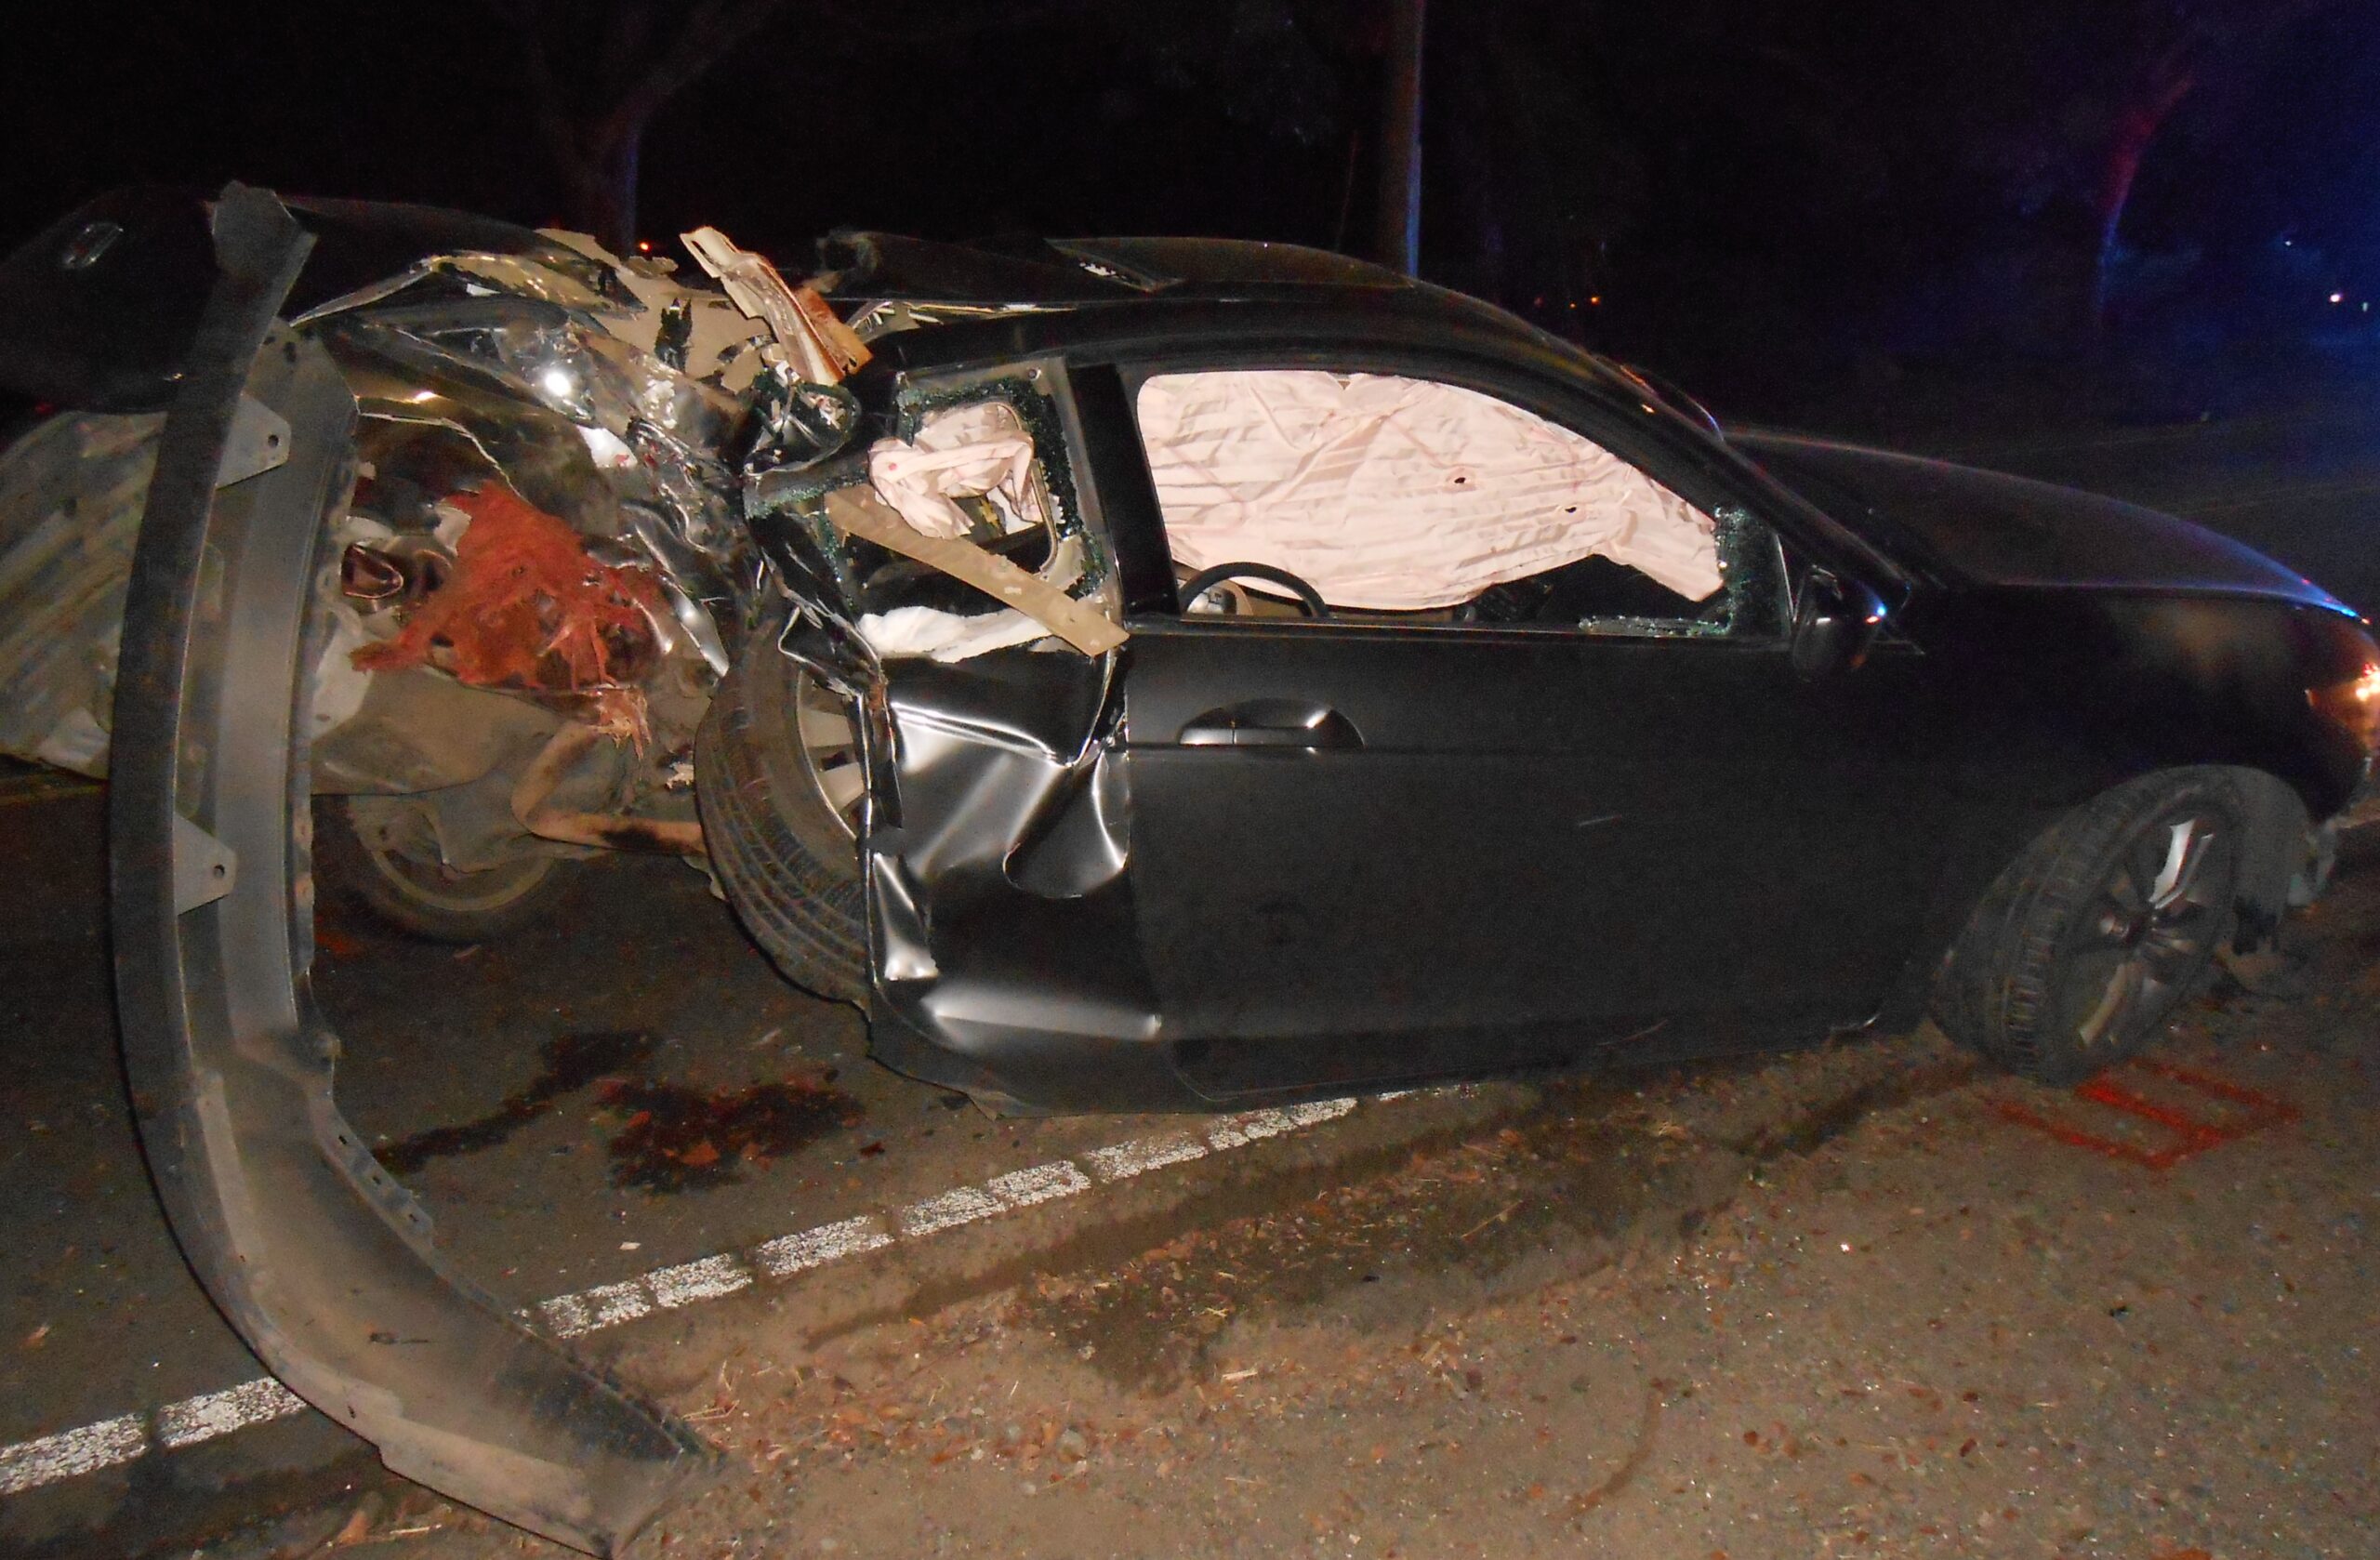 30-Year-Old St. Croix Driver Crashes Honda Sedan Into A Tree Near St. Croix Educational Complex